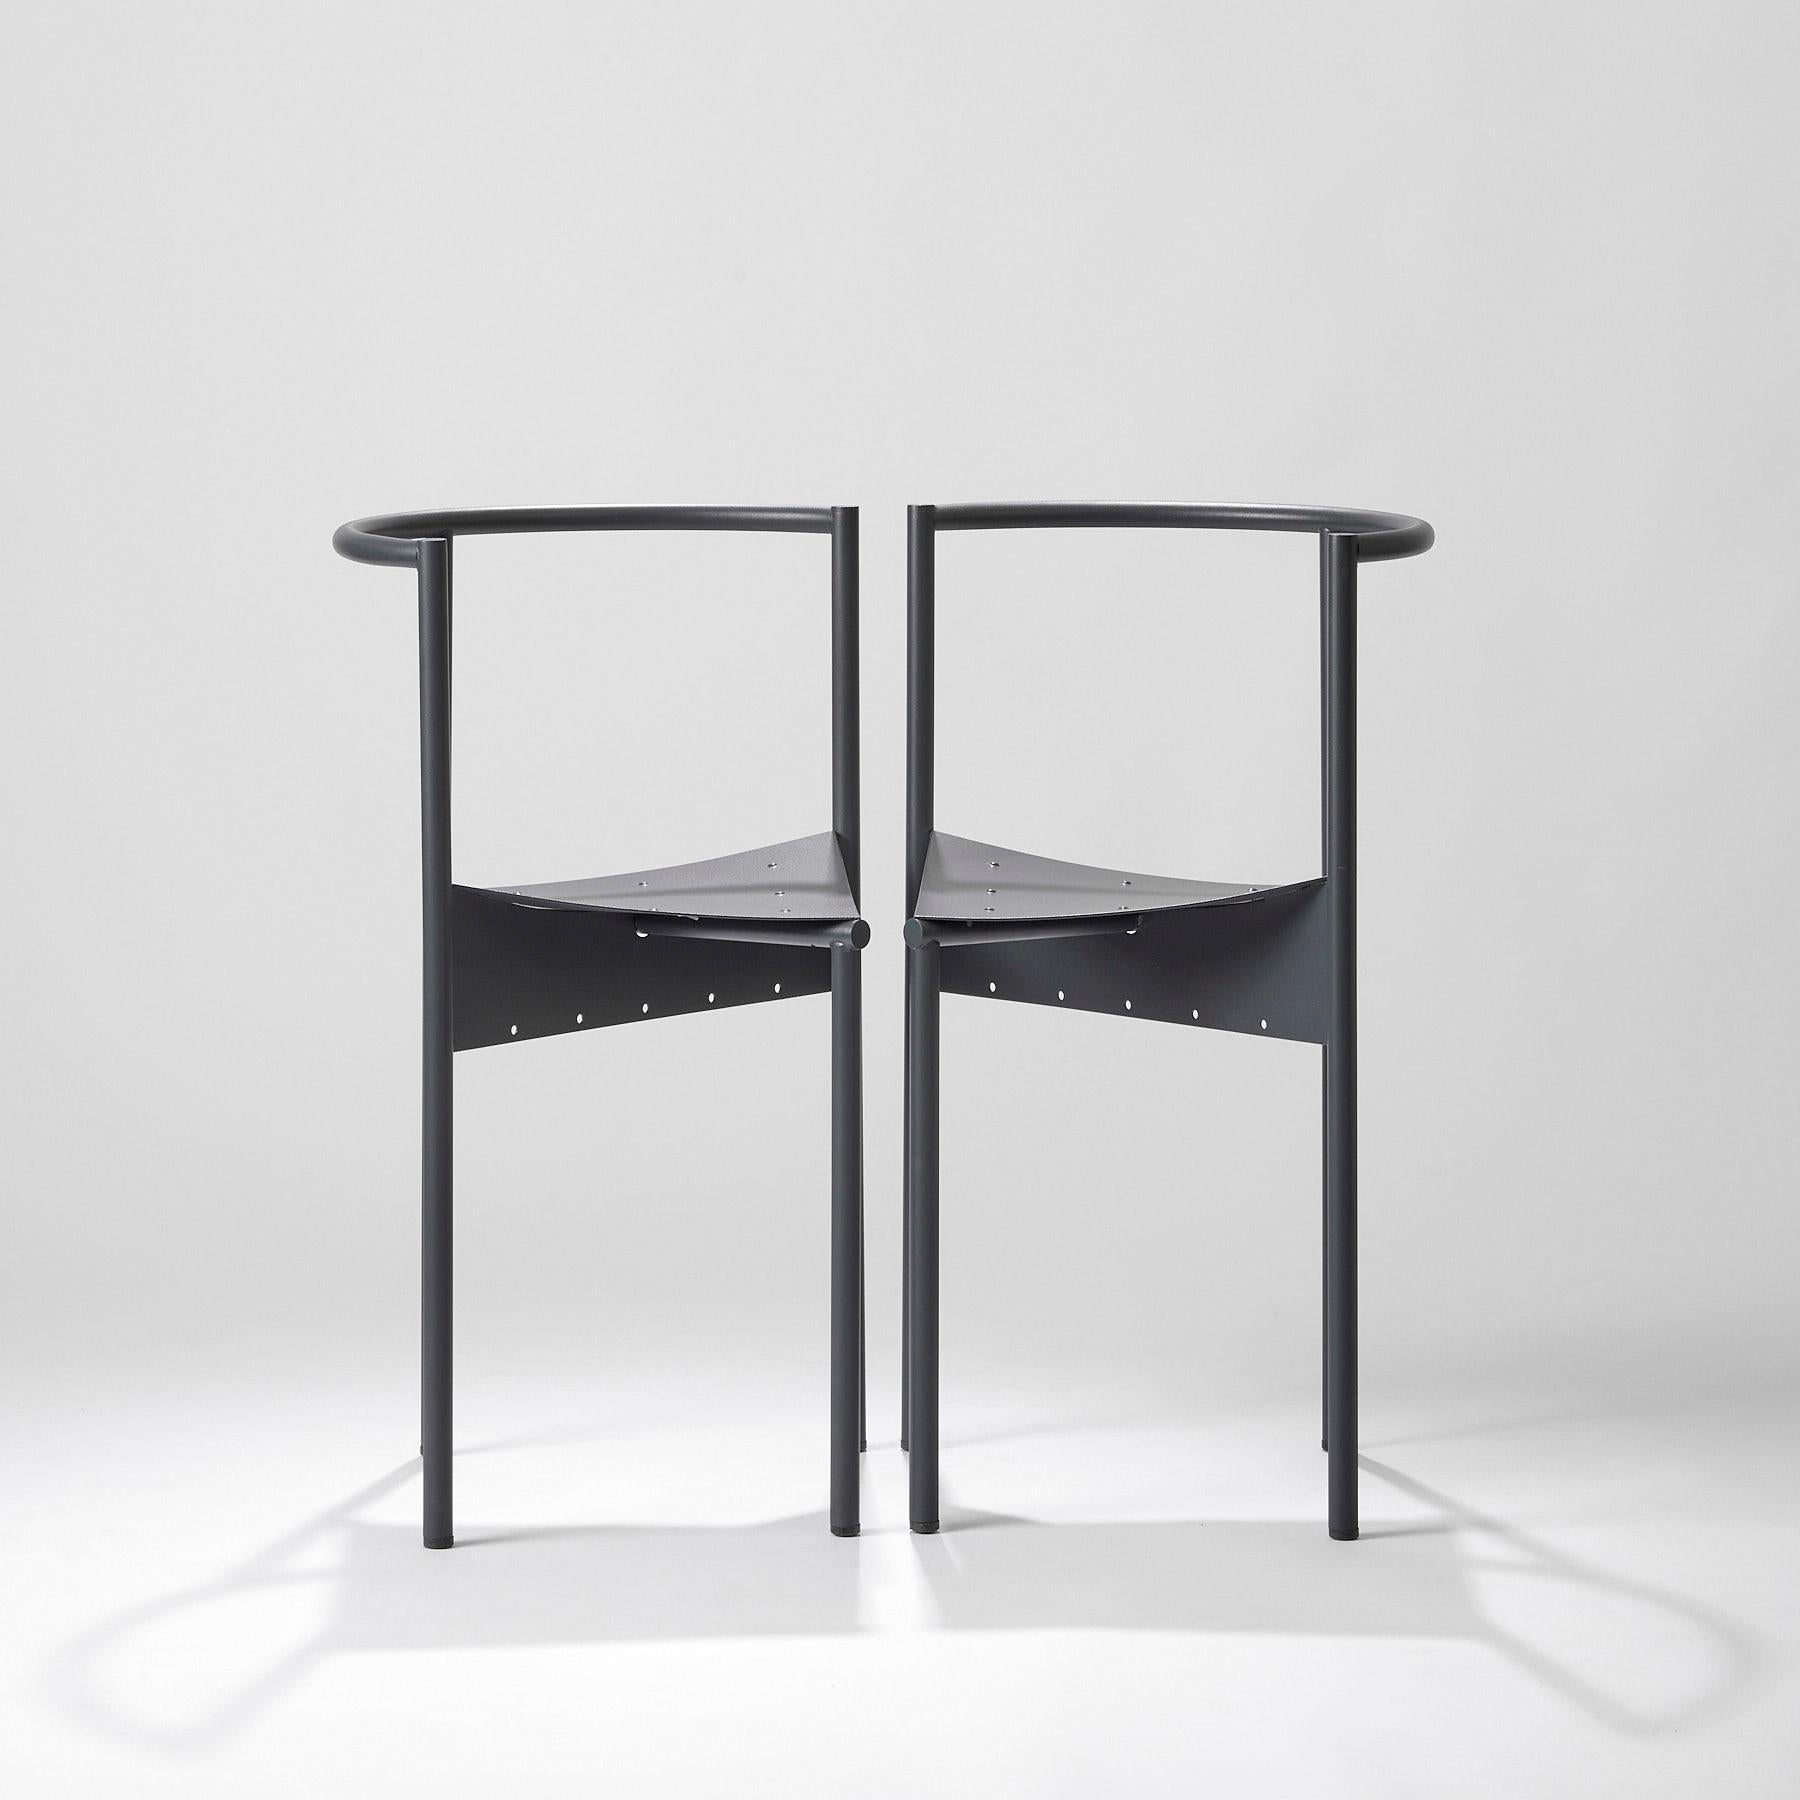 PHILIPPE STARCK (Born in 1949)
Wendy Wright chairs, circa 1986
Disform Barcelona editor 
Pair of chairs in anthracite lacquered metal
H. 75 cm - L. 48 cm - D. 47 cm.